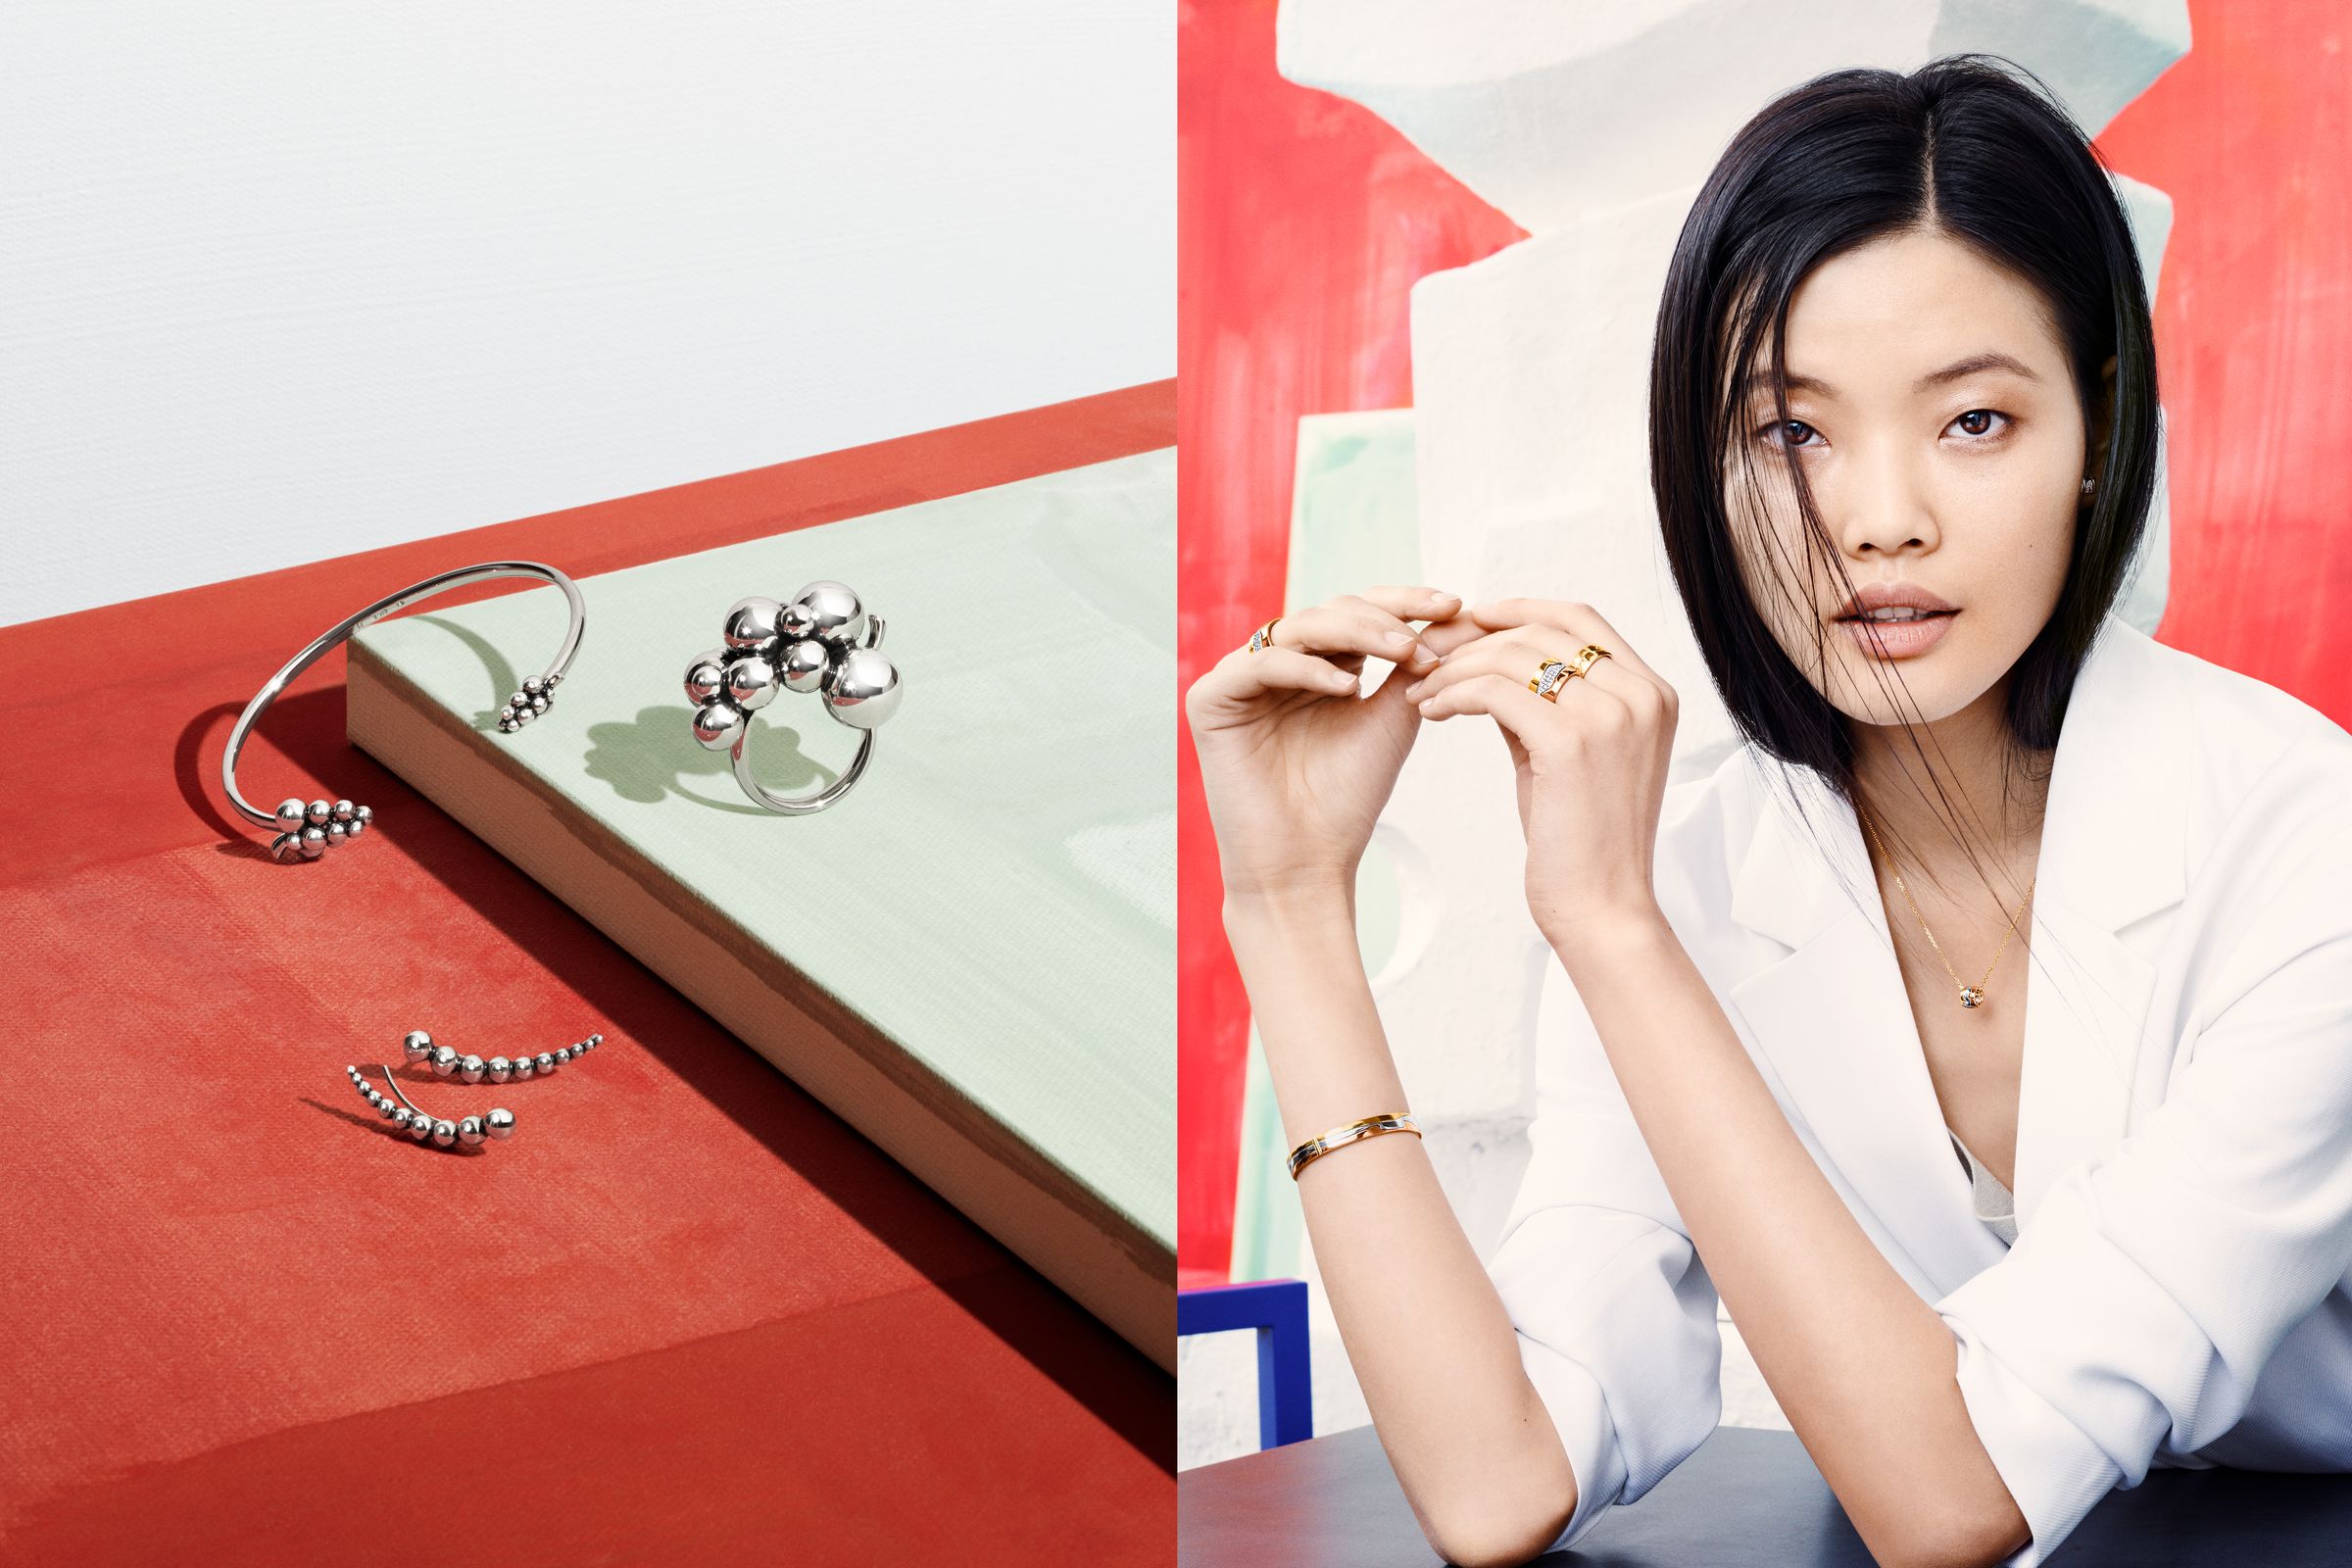 Georg Jensen campaign photographed by Hasse Nielsen